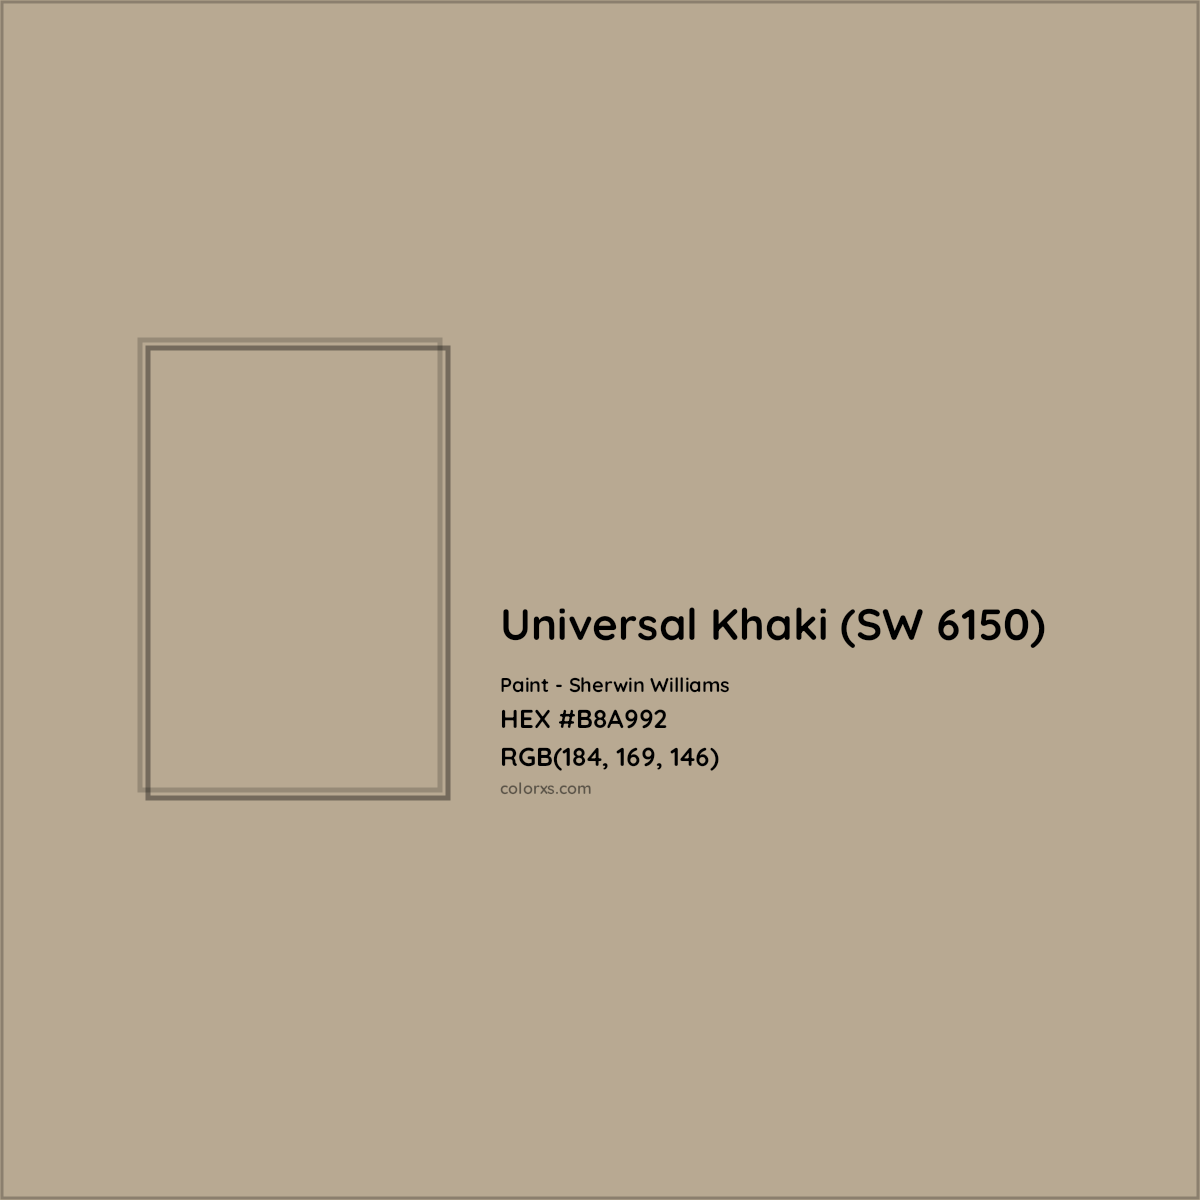 HEX #B8A992 Universal Khaki (SW 6150) Paint Sherwin Williams - Color Code